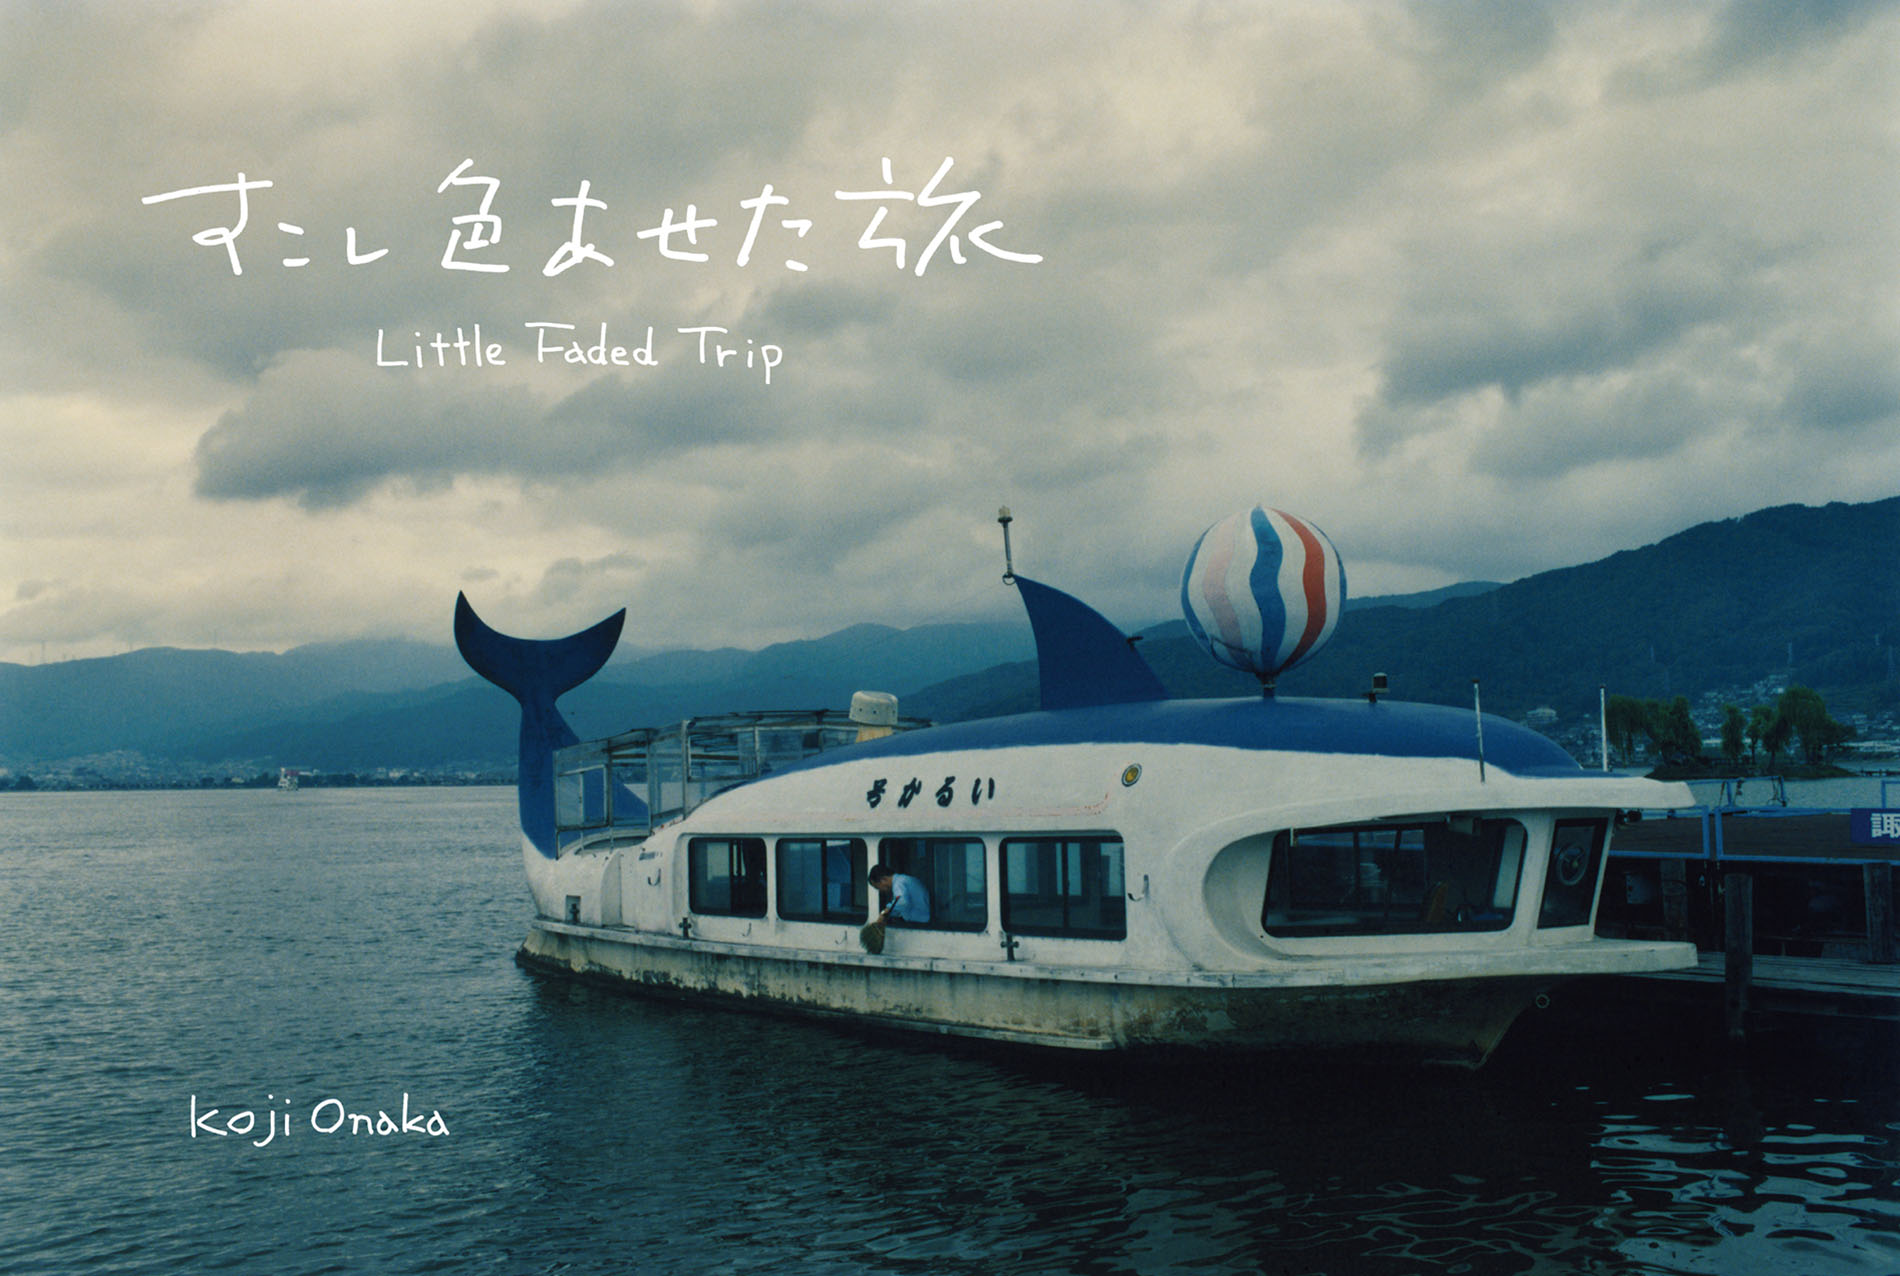 Autumn Photo Exhibition 尾仲浩二 少し色あせた旅 Little Faded Trip Gallery0369